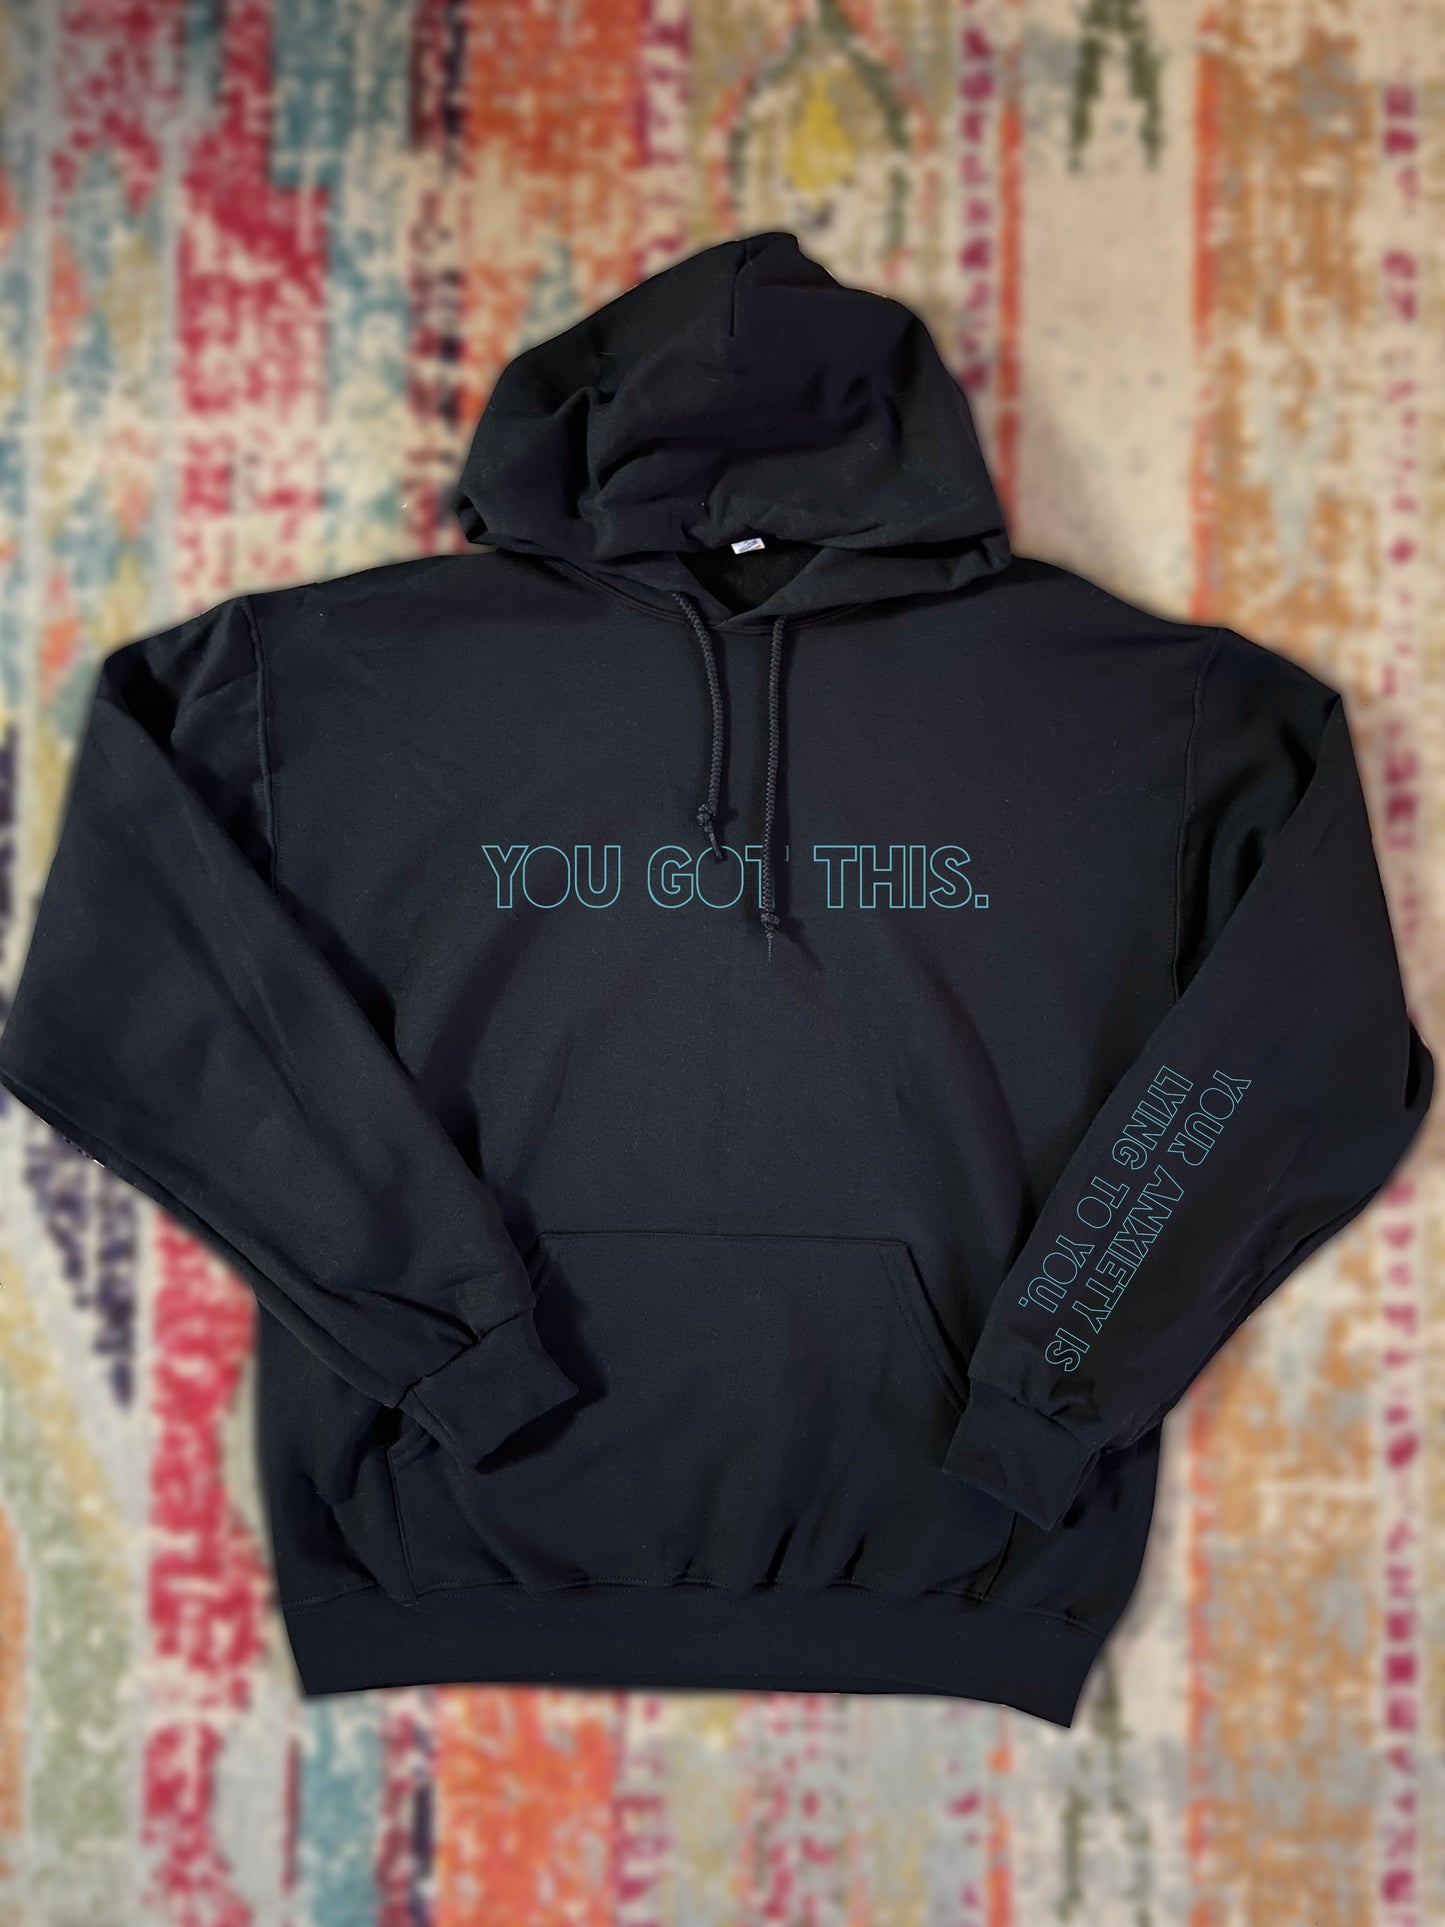 You Got This. Hoodie. [PREORDER]